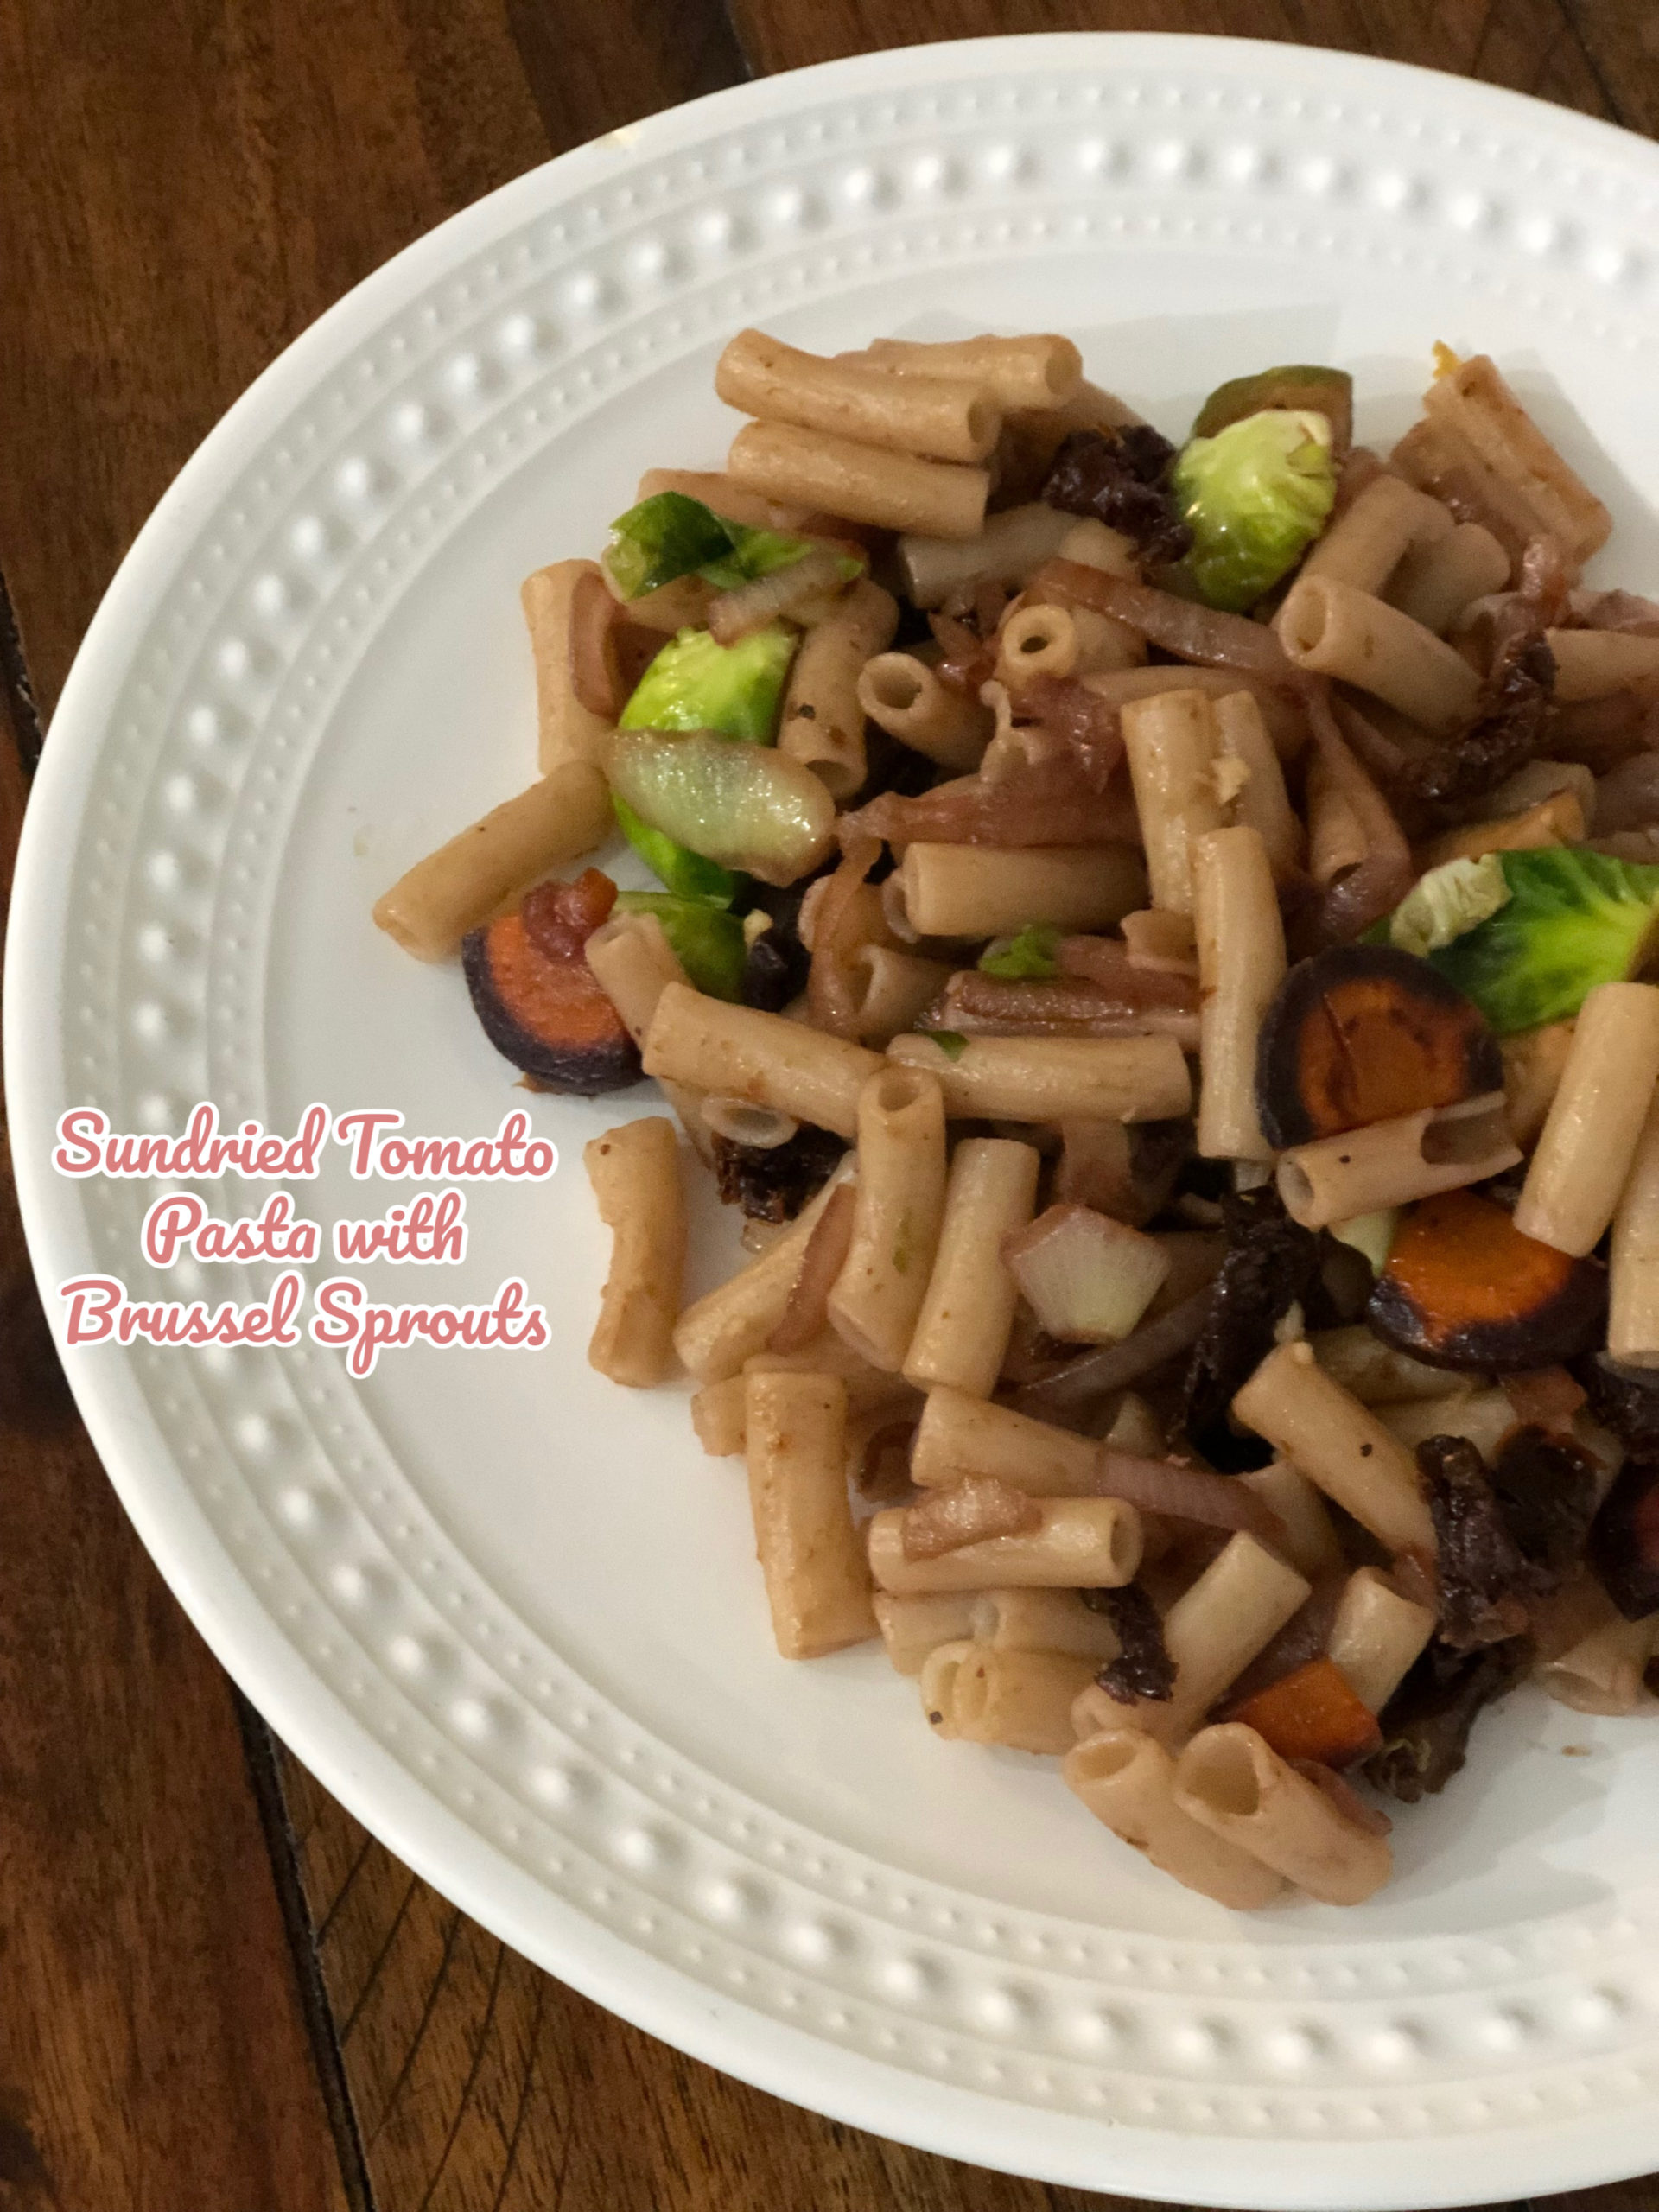 Sun-dried Tomato Pasta with Brussel Sprouts